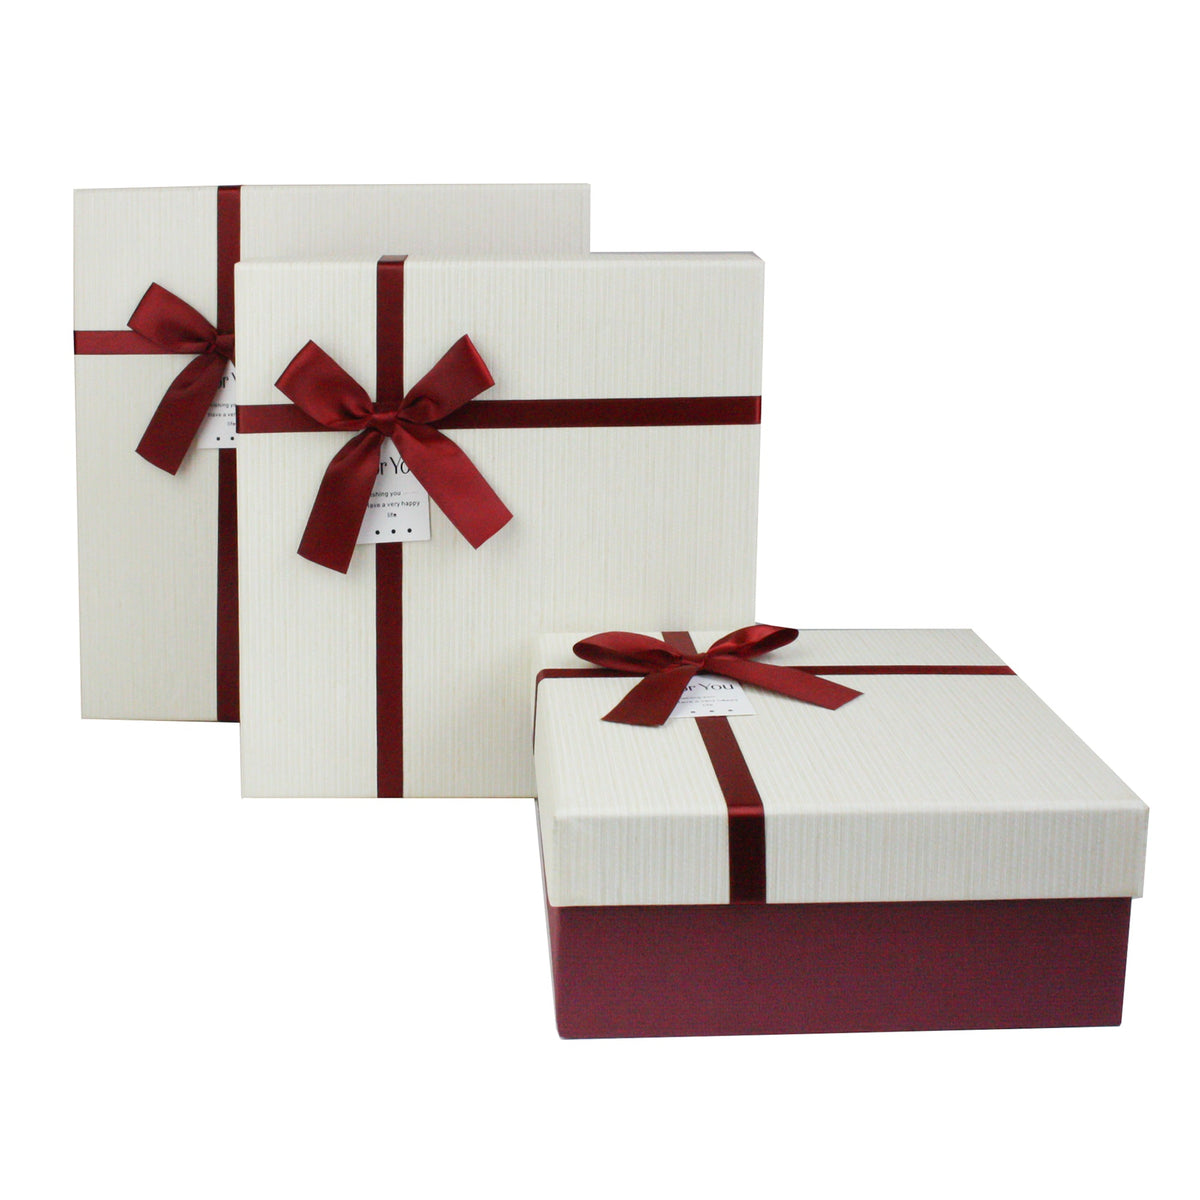 Set of 3 Burgundy/Cream Gift Boxes With Red Satin Ribbon